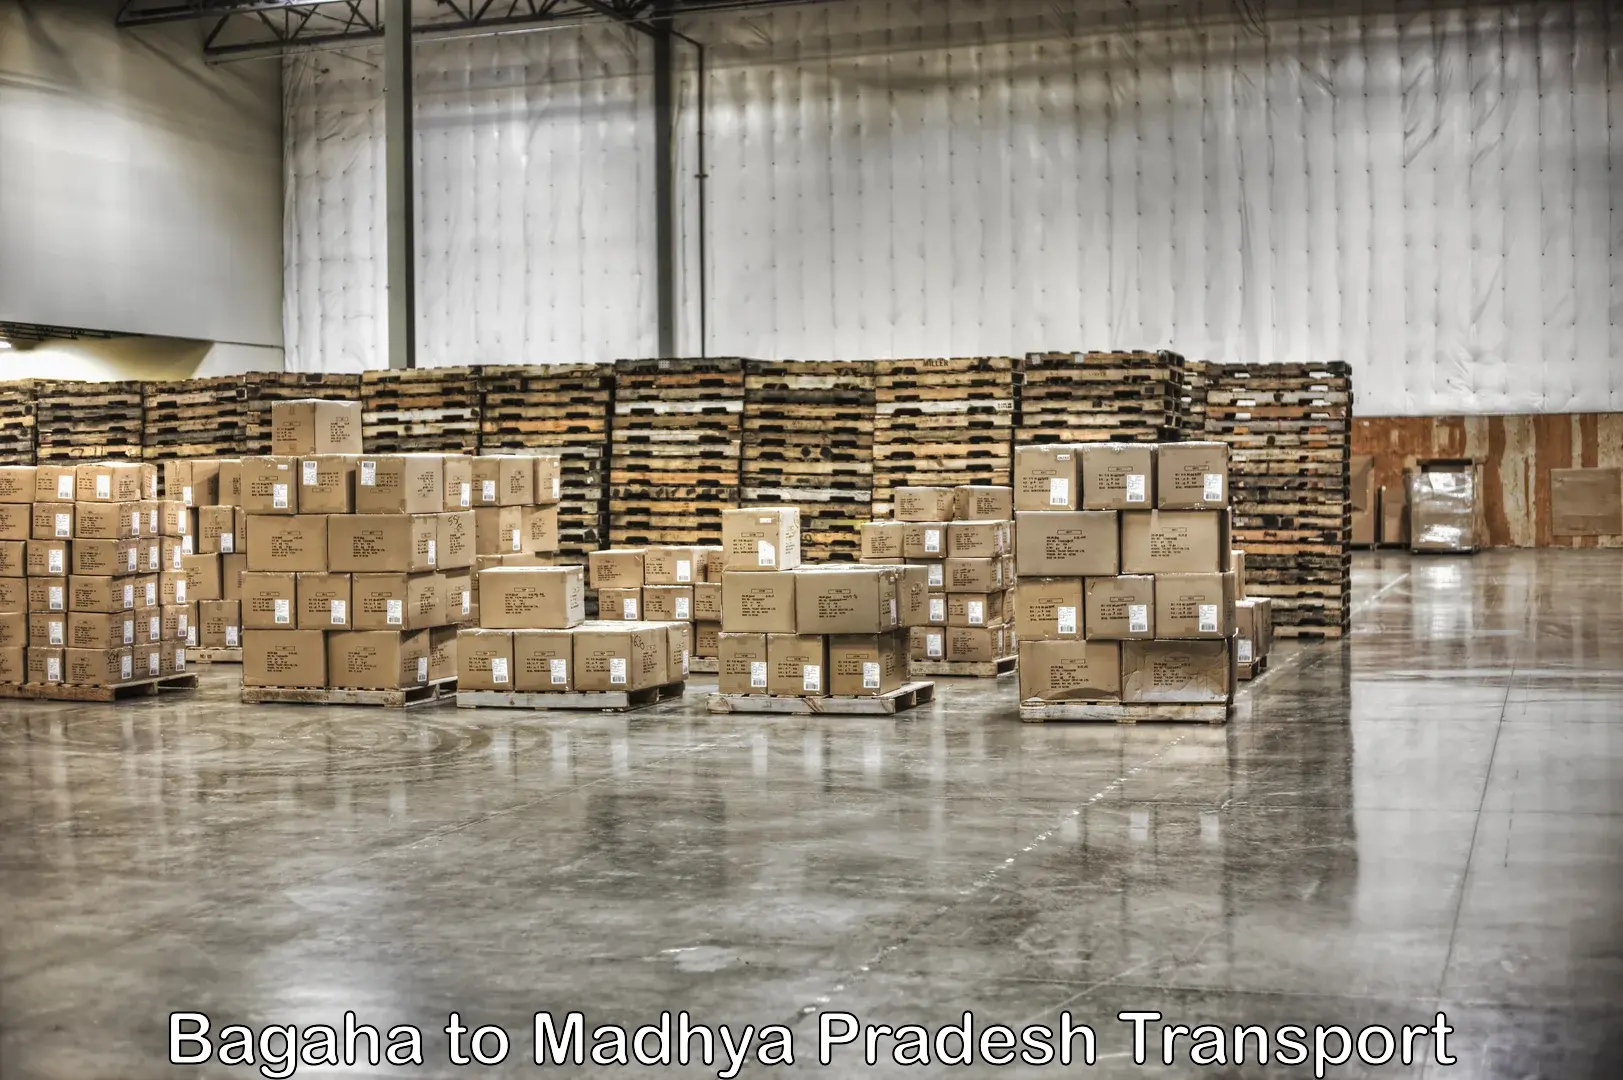 Truck transport companies in India Bagaha to Madwas